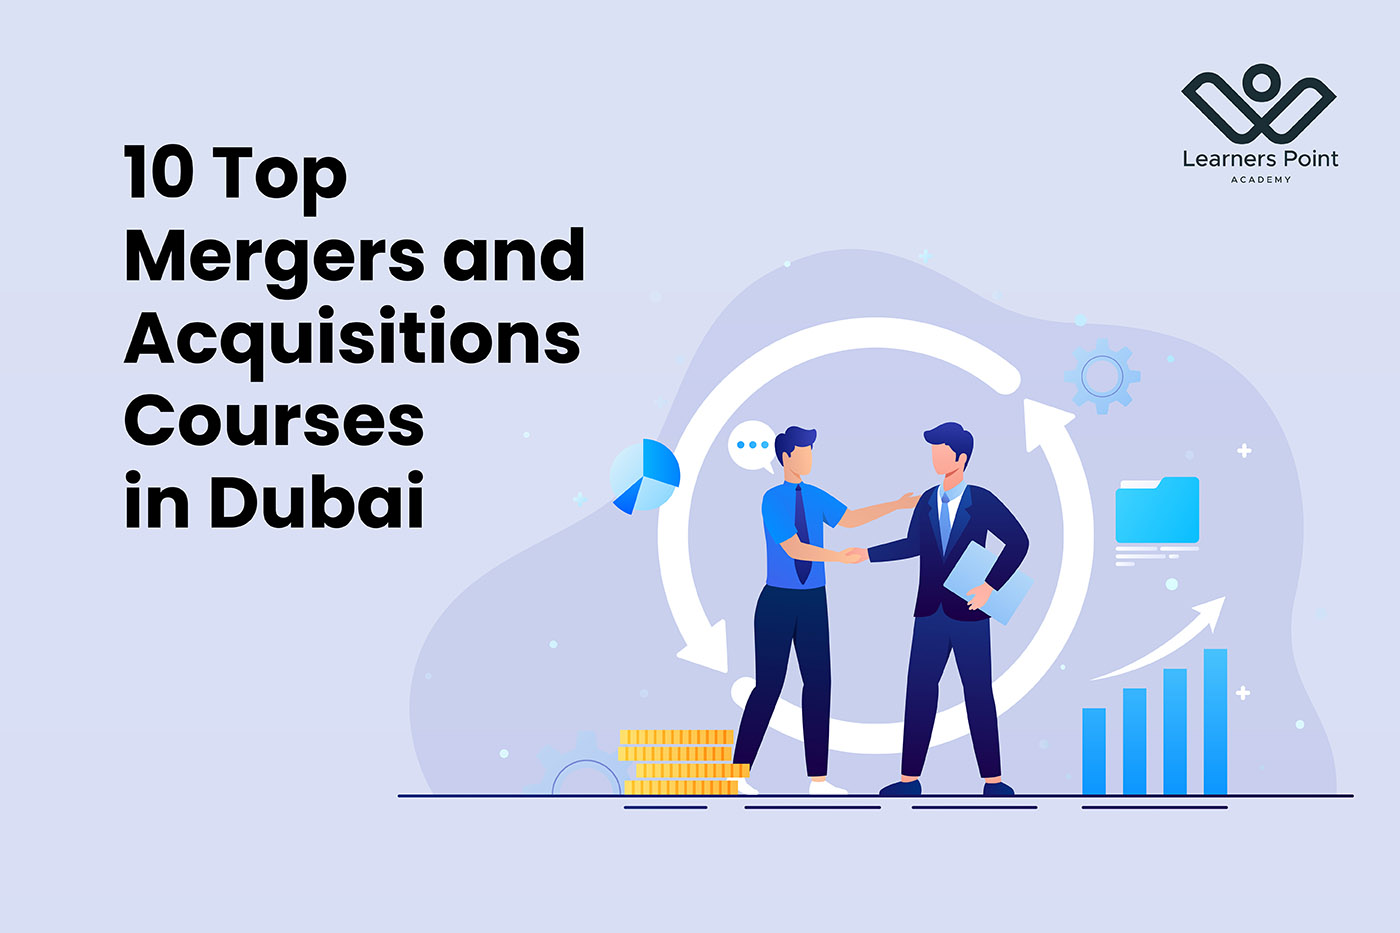 10 Top Mergers and Acquisitions Courses in Dubai